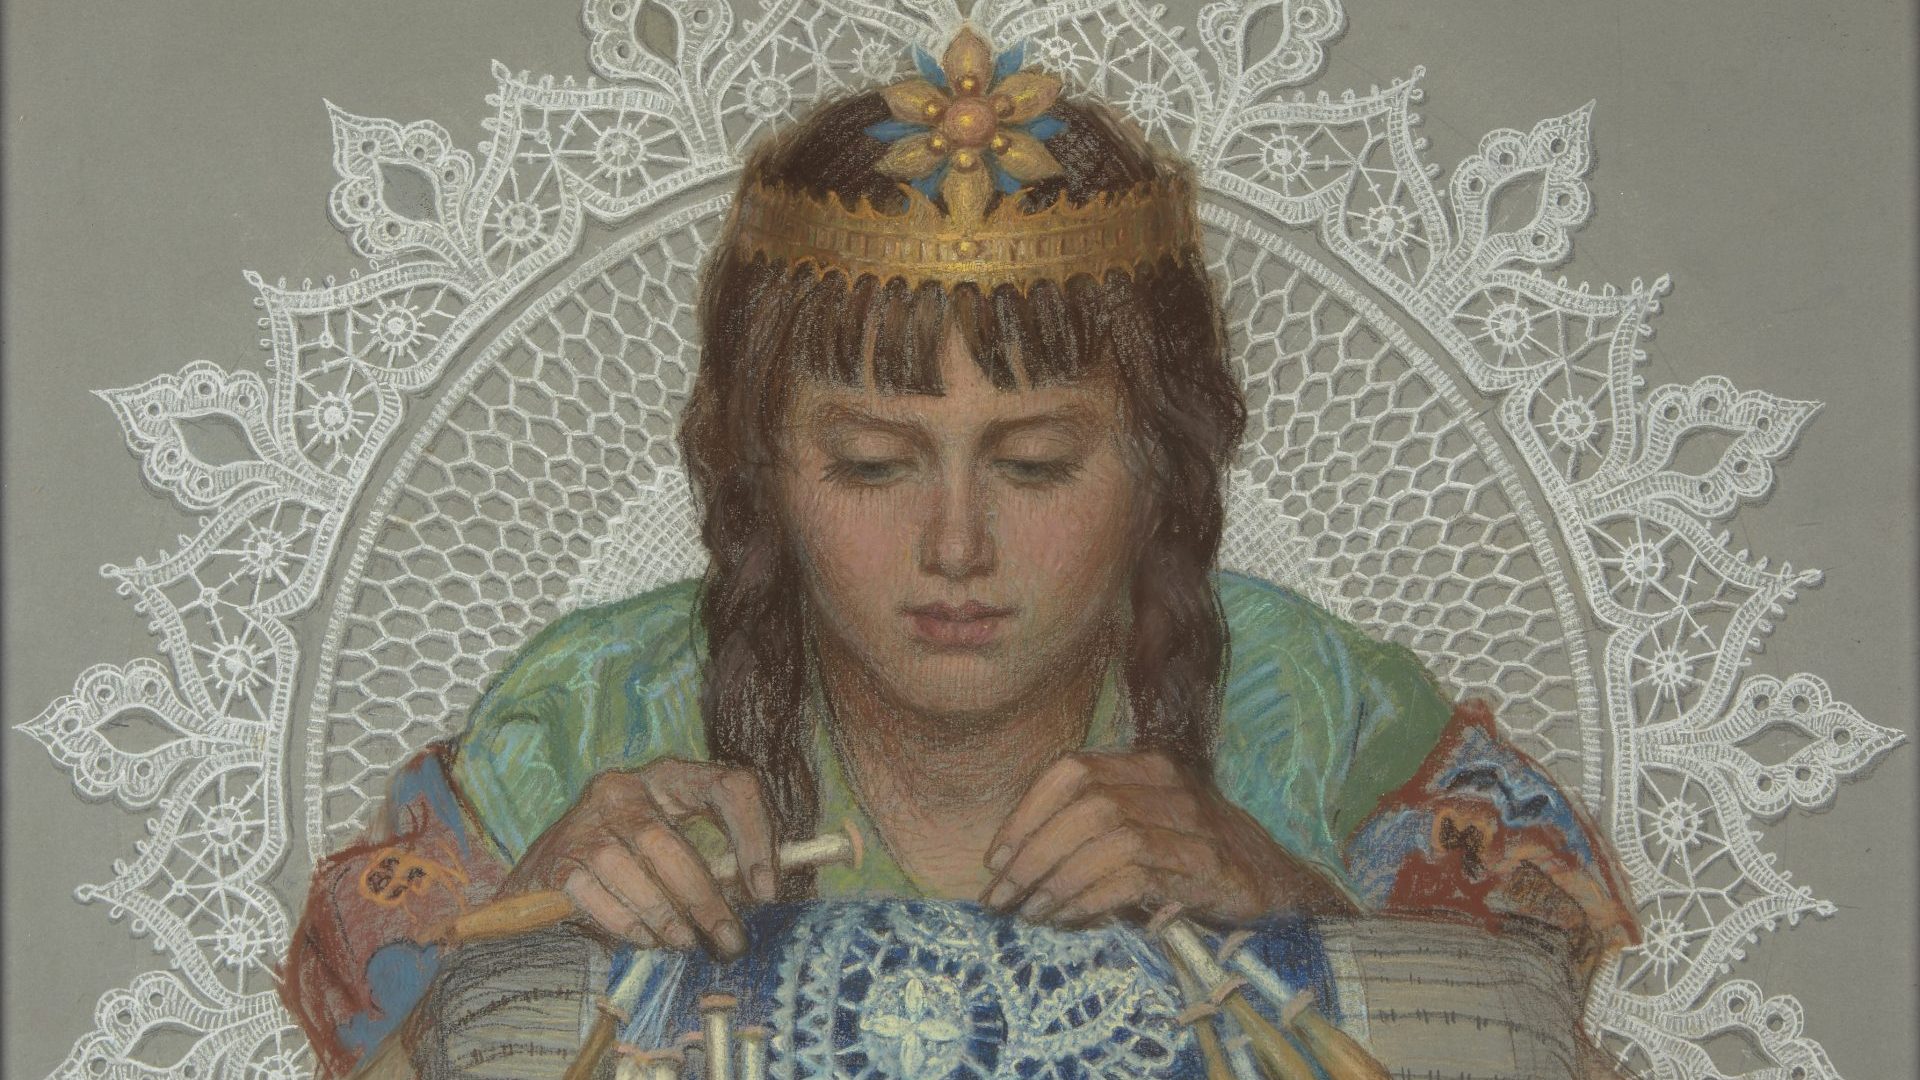 At Bobbin Lacemaking
(Legend) by Karol Kłosowski. Photo: Private Collection by Descent from the artist.